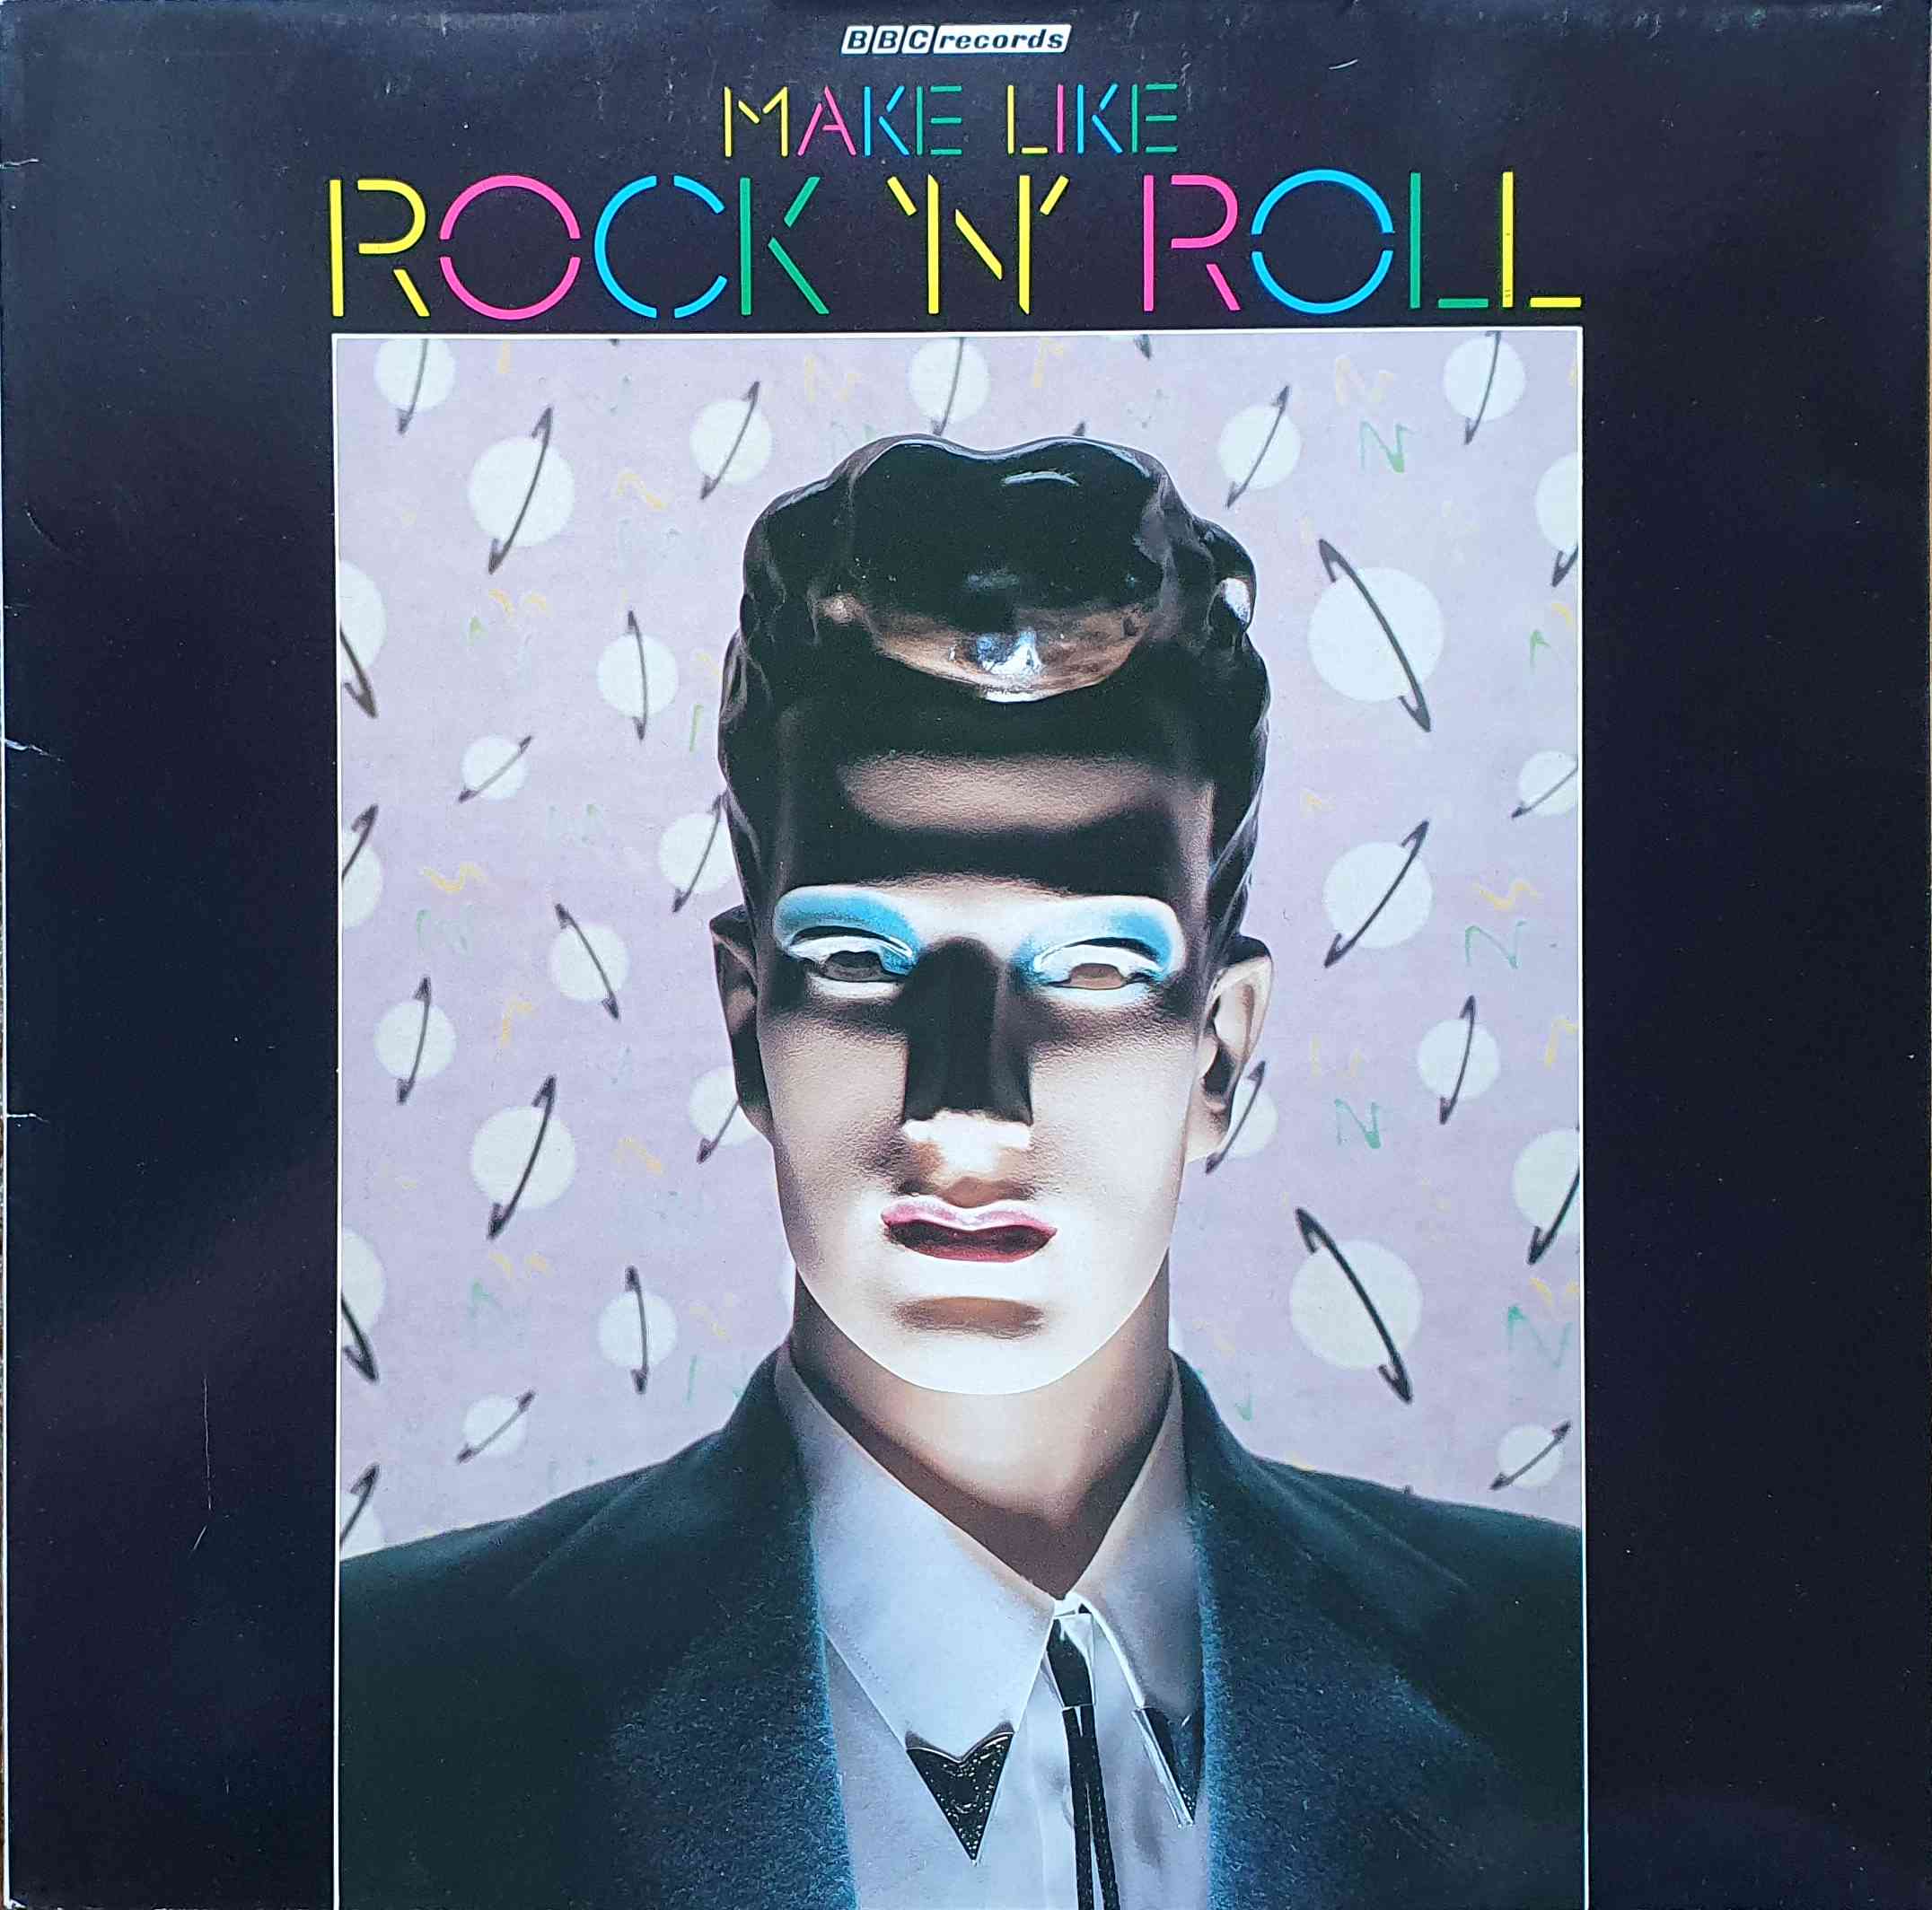 Picture of It's rock 'n' roll by artist Various from the BBC albums - Records and Tapes library